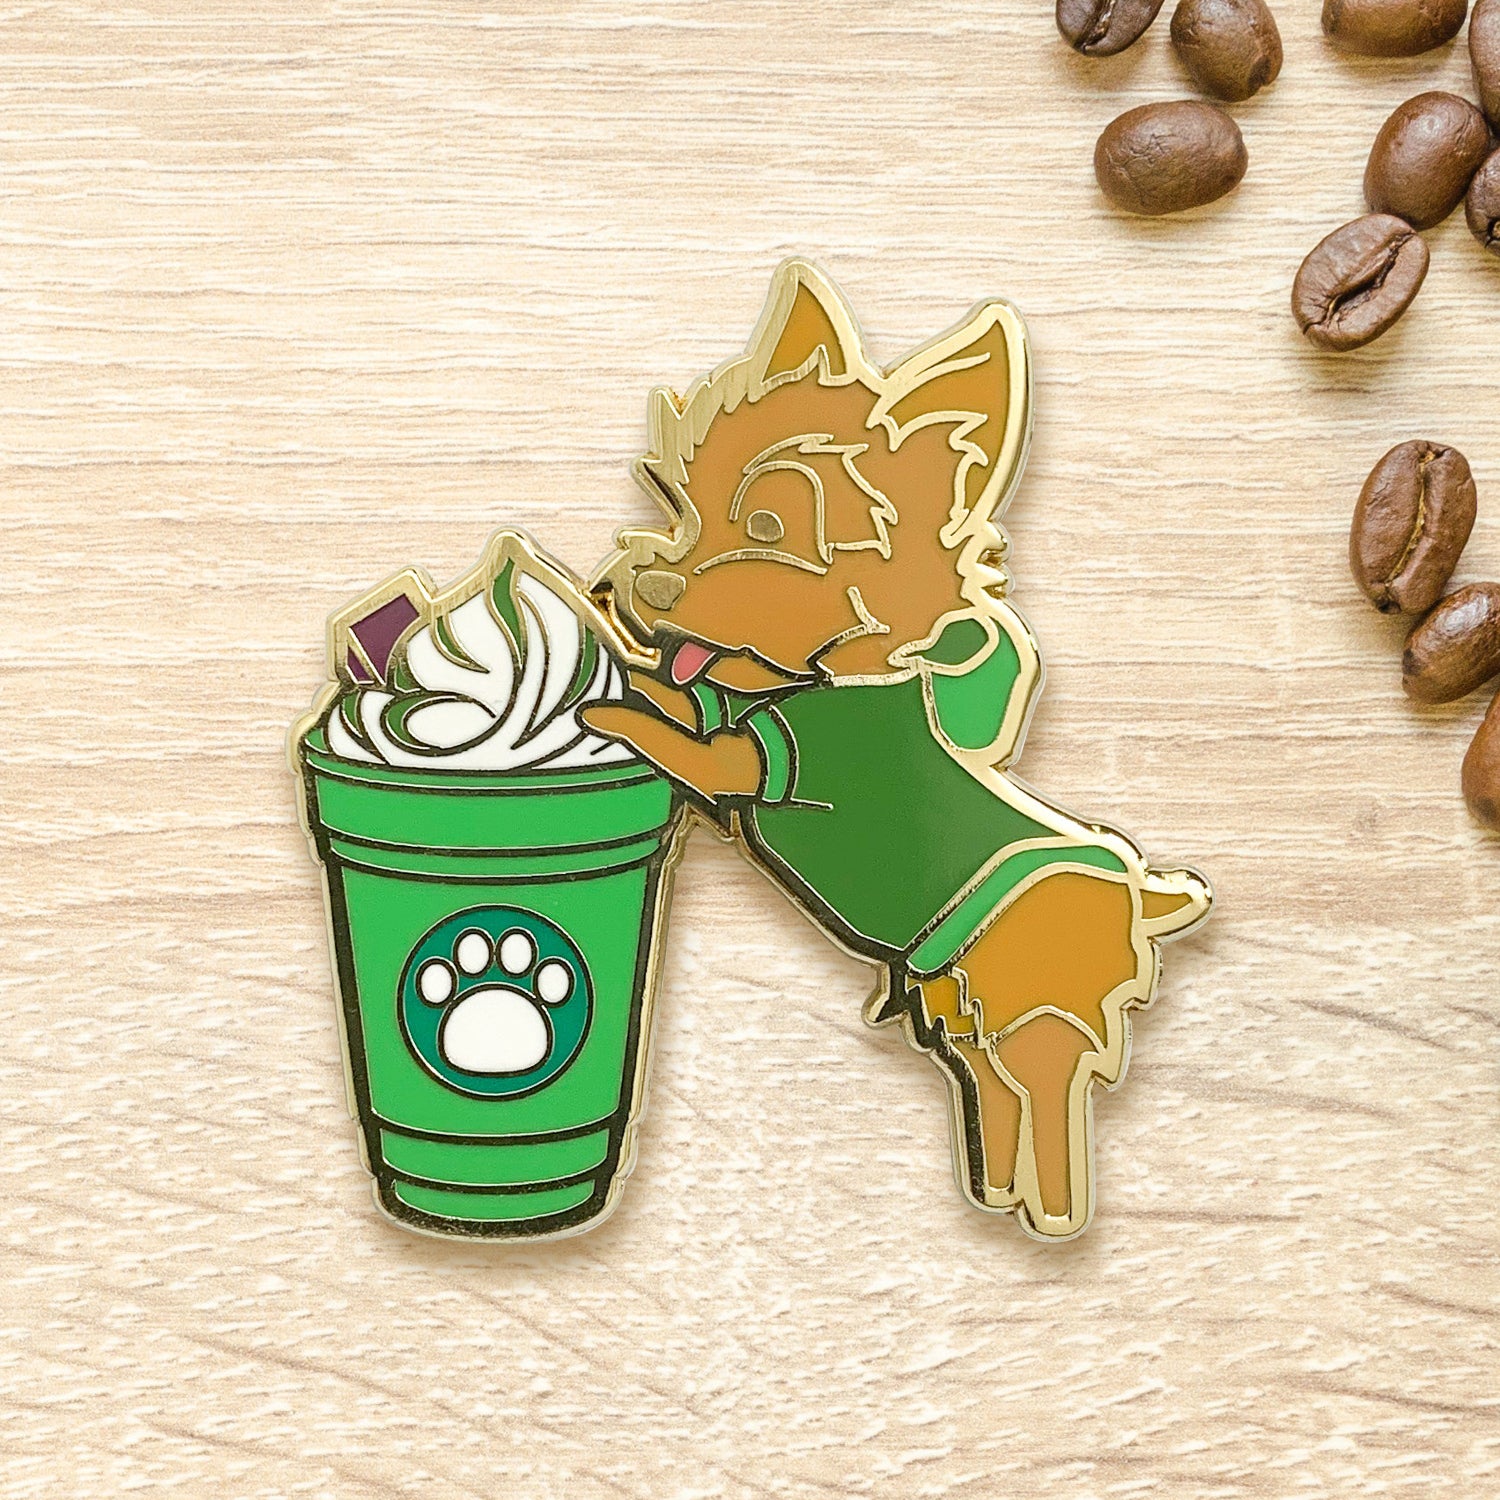 Yorkshire Terrier & Matcha Frappe Coffee Hard Enamel Pin by Cocktail Critters